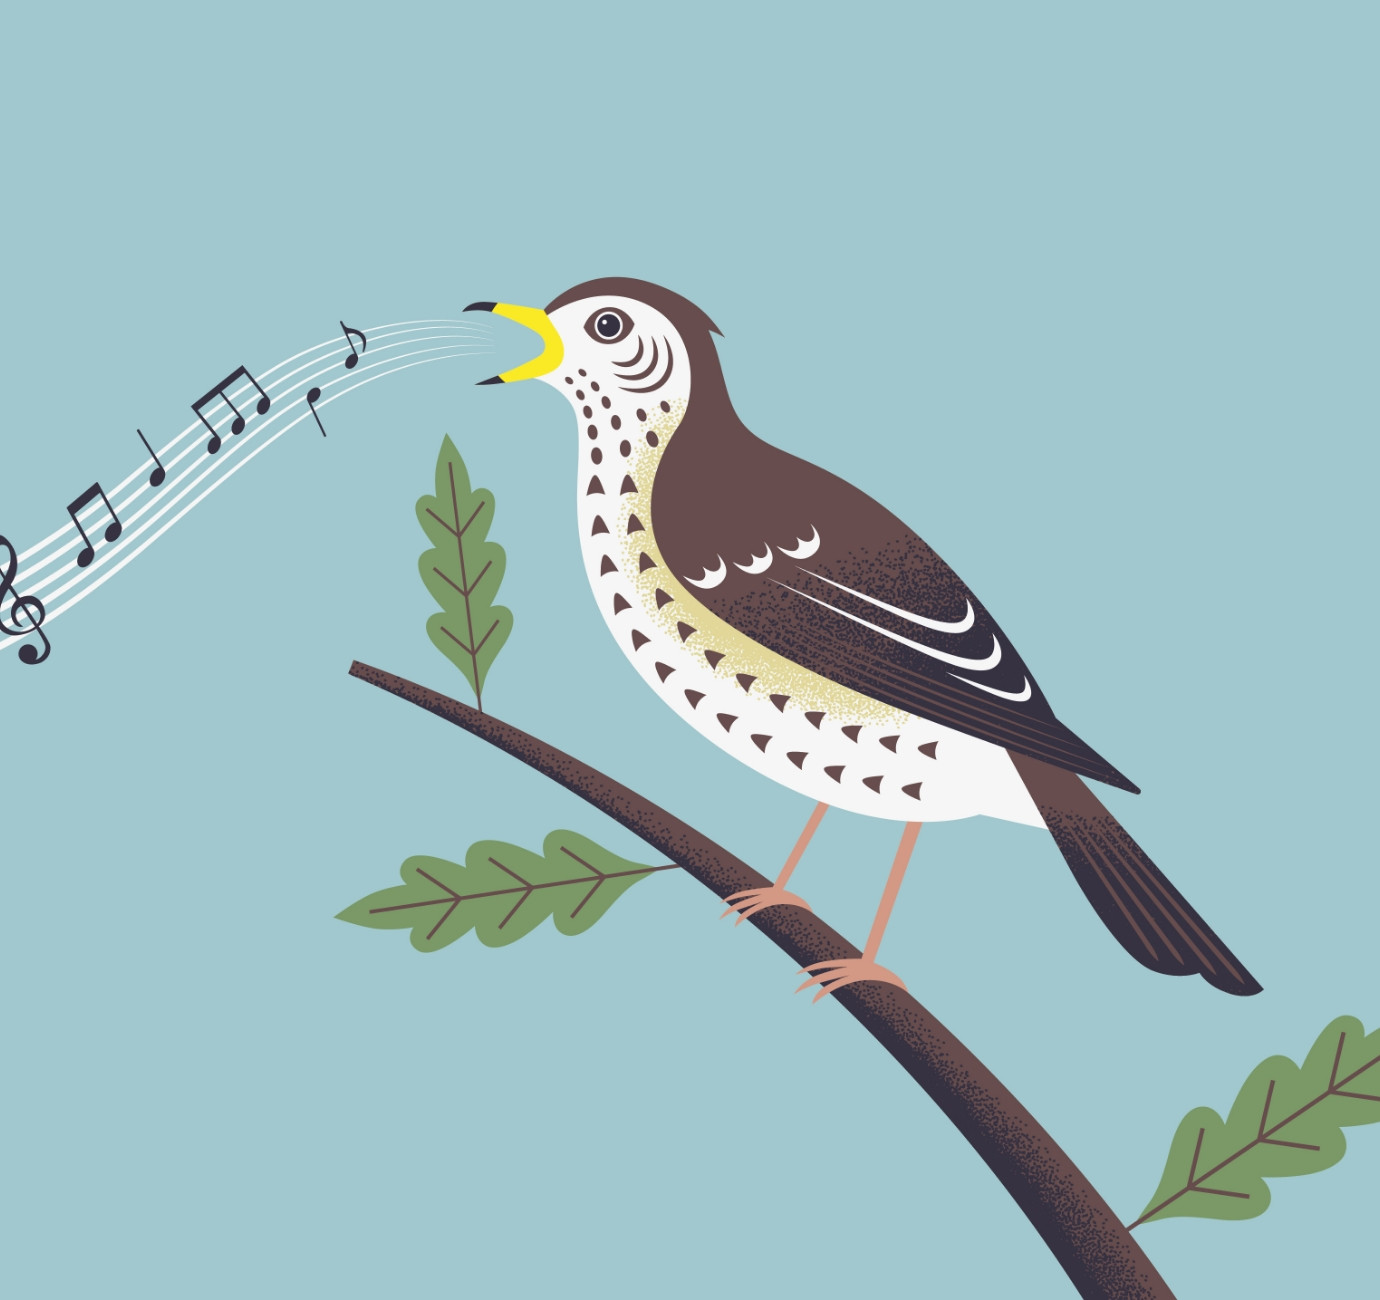 Lincs County Council bird spotting illustration by Root Studio